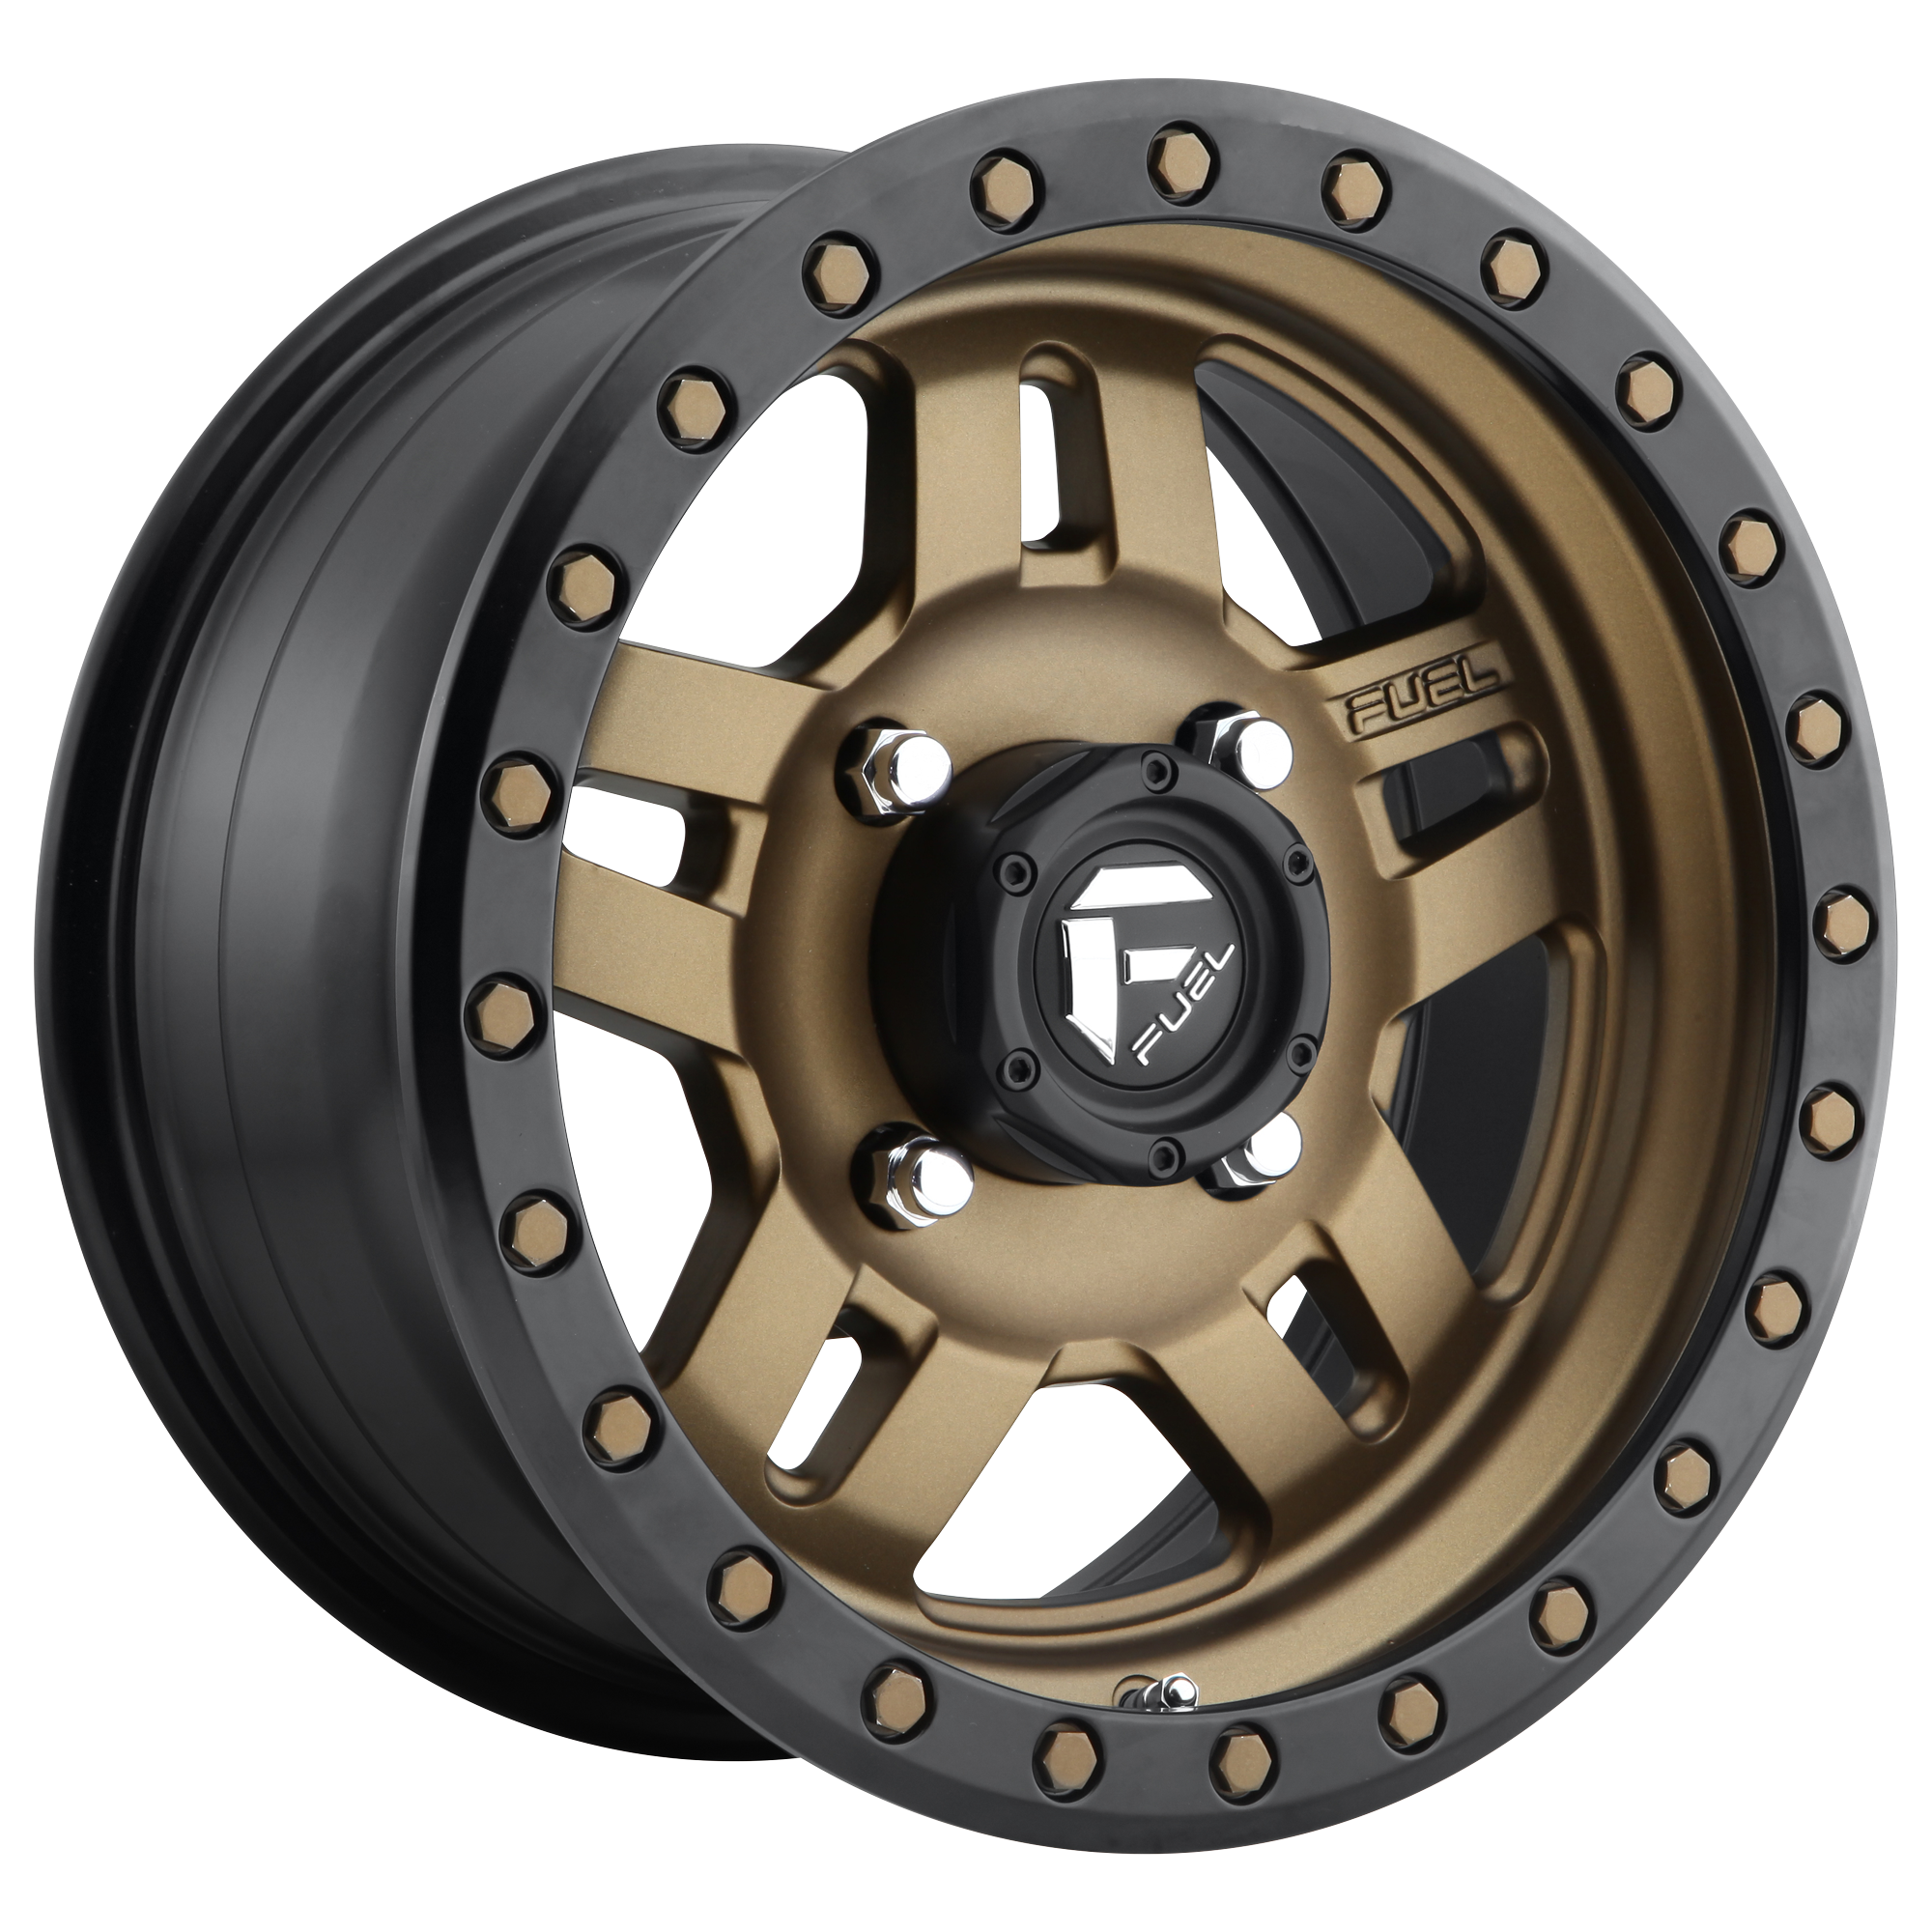 ANZA 4+3 15x7 4x156.00 MATTE BRONZE BLACK BEAD RING (13 mm) - Tires and Engine Performance